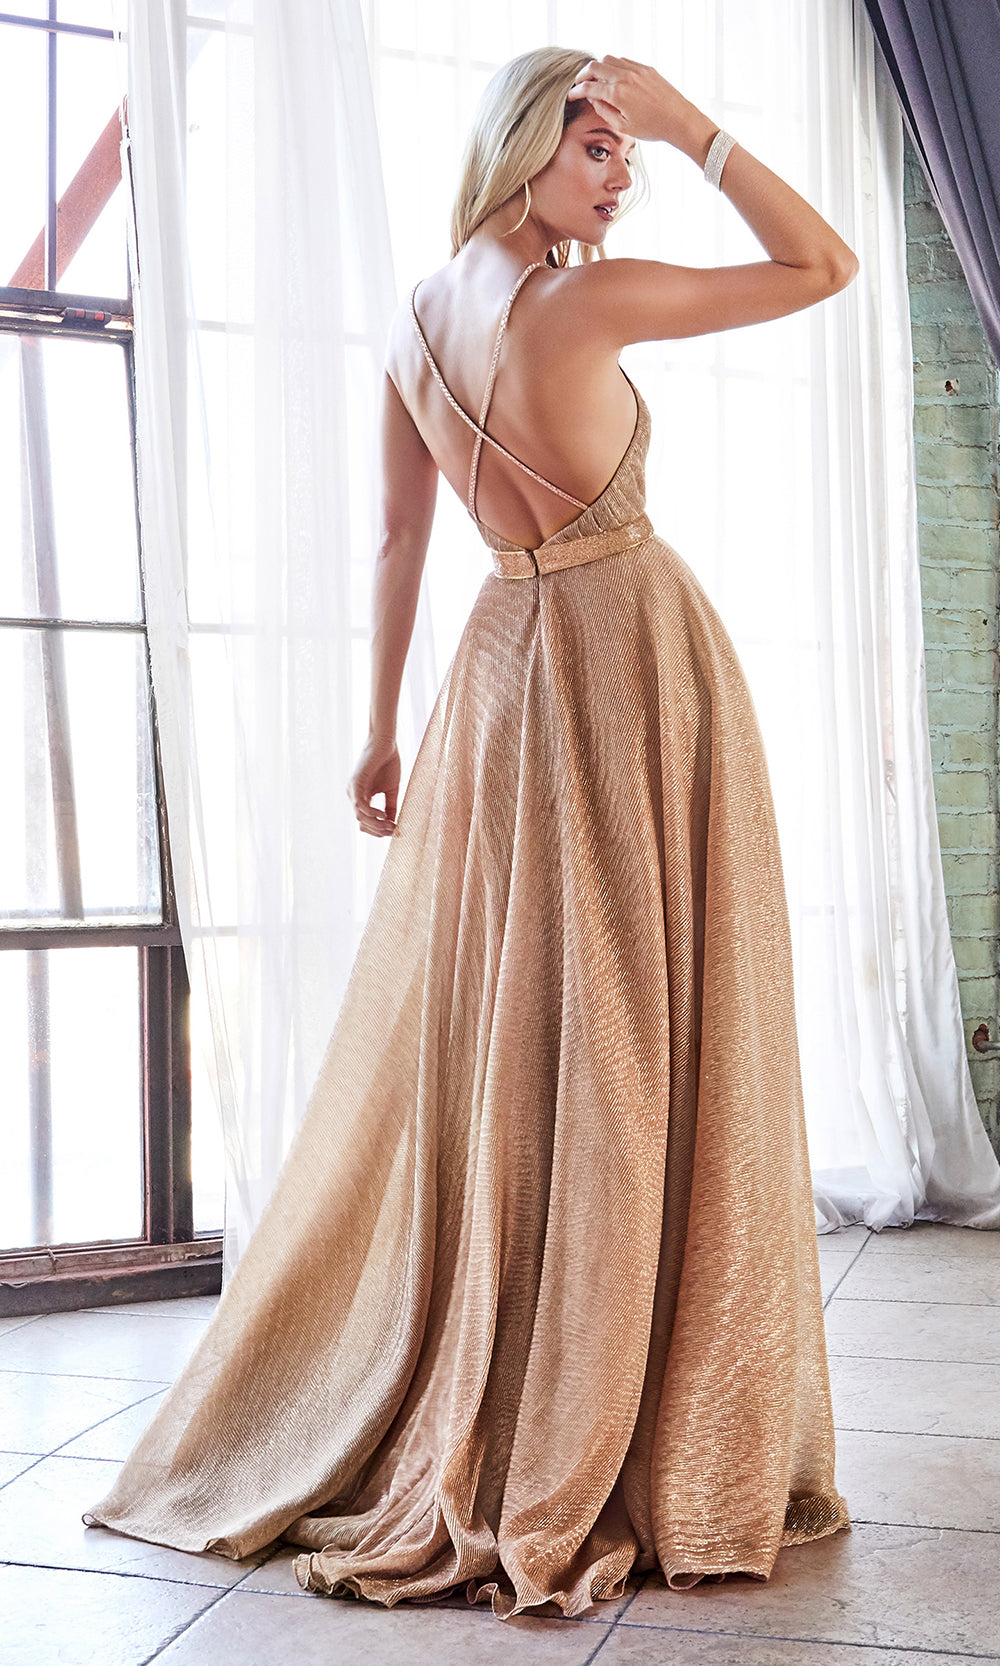 Cinderella Divine CW167 long rose gold flowy metallic dress with low back